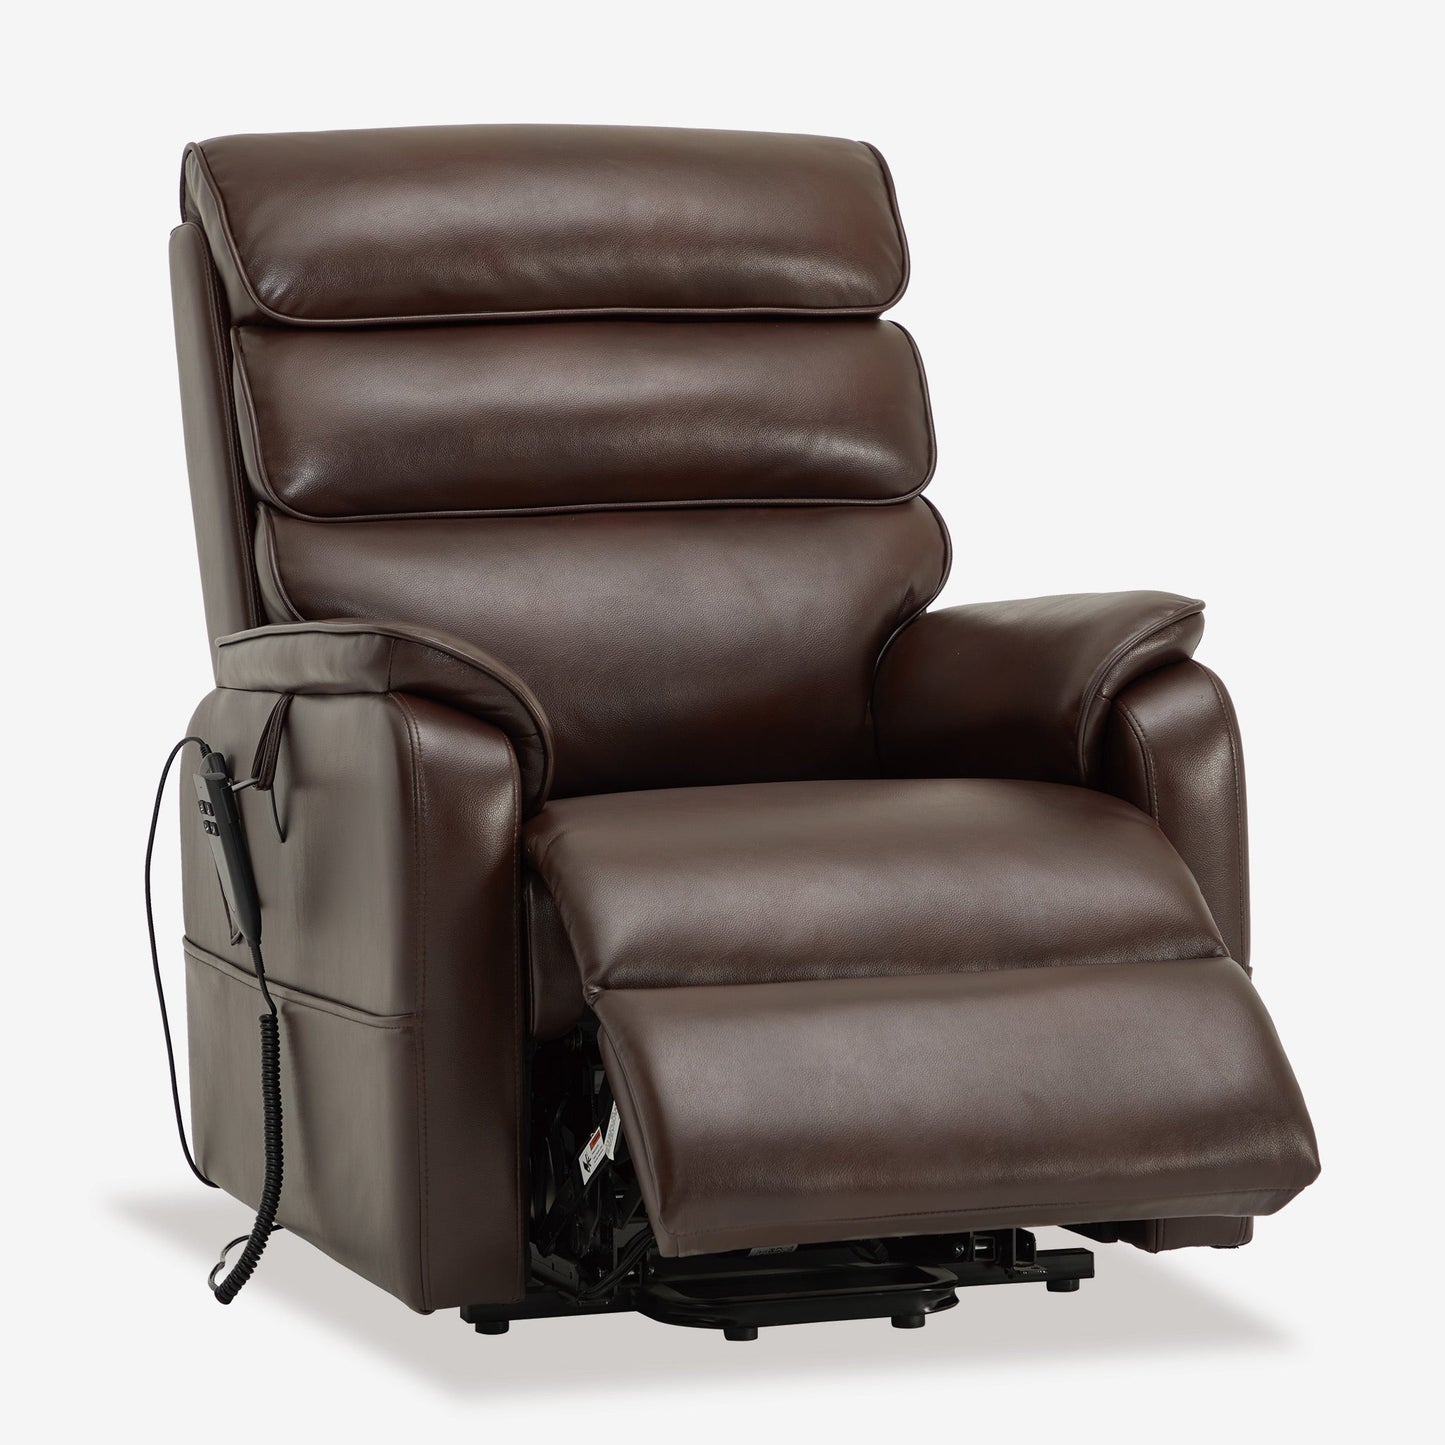 Power Lift Recliner Chair With Heat Massage And Infinite Positons